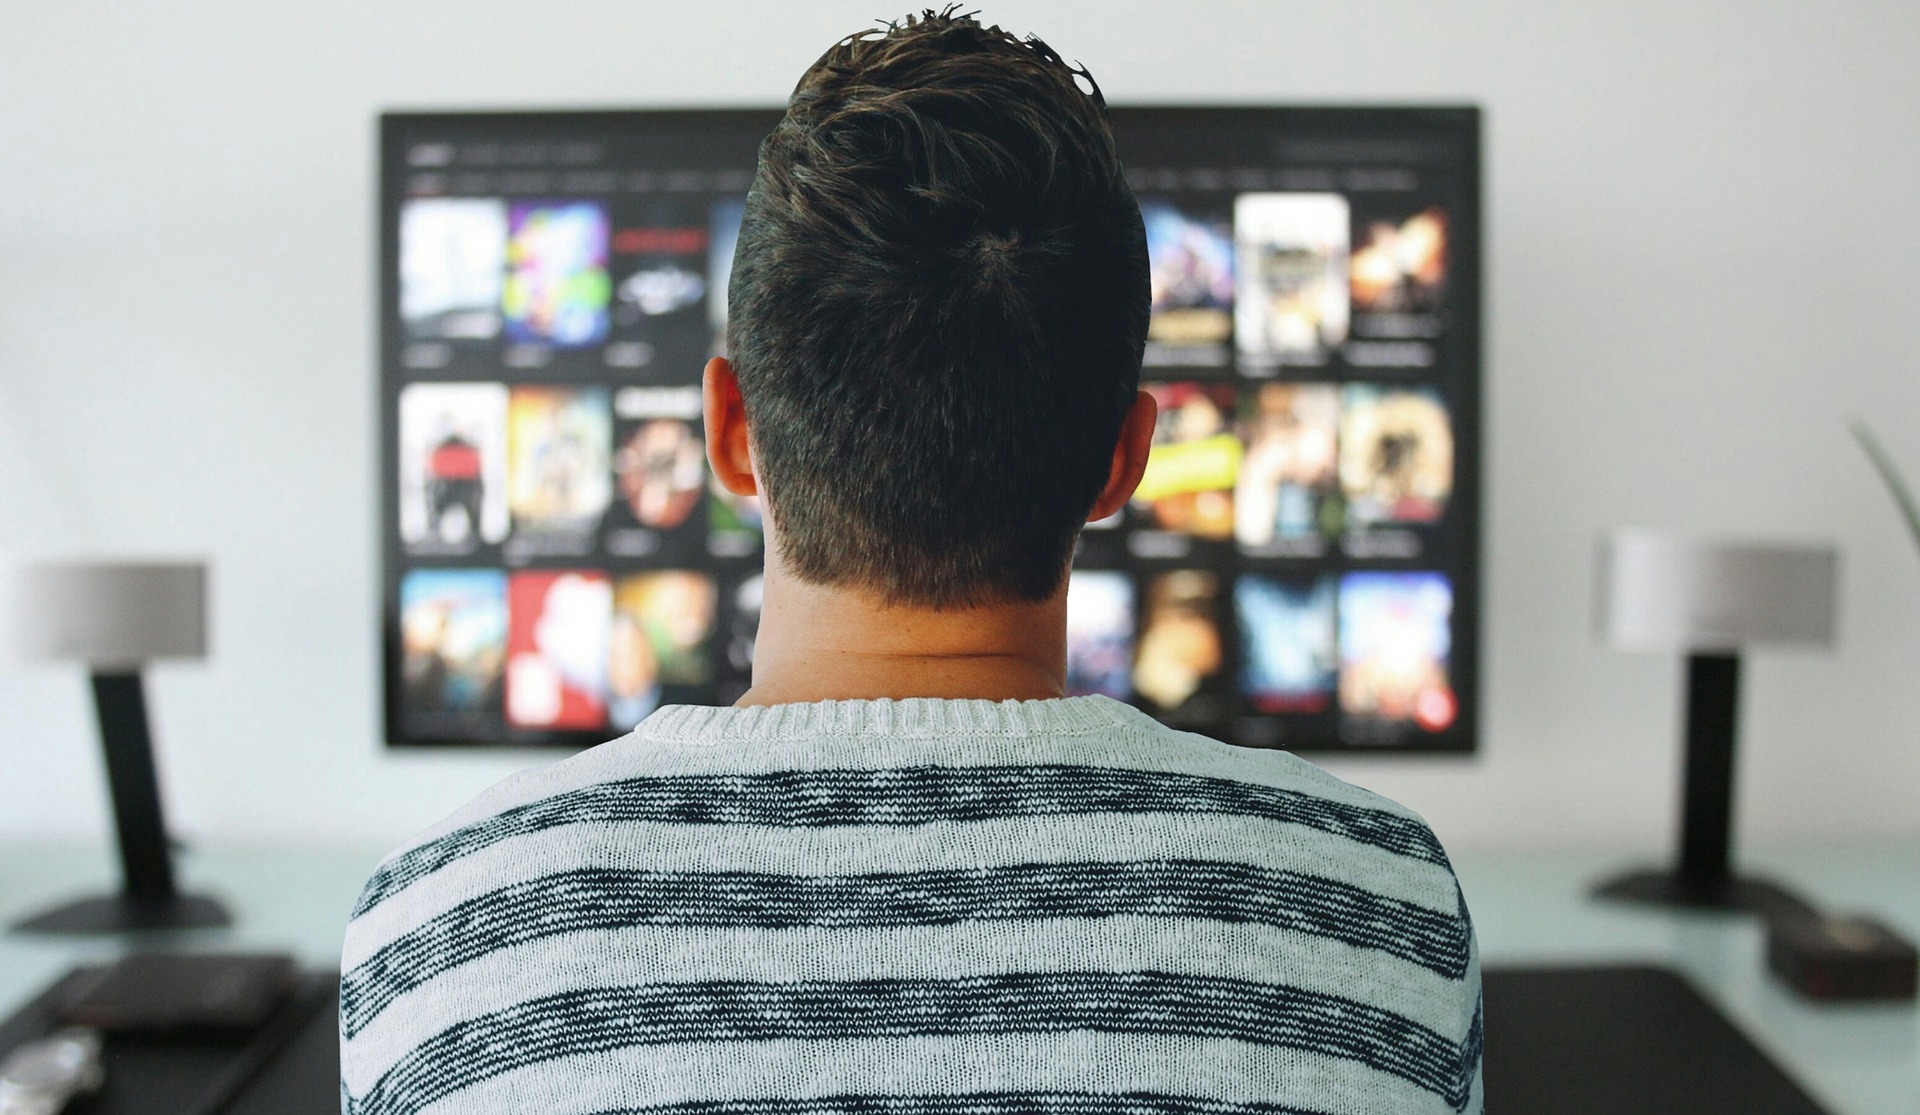 Lessons From Netflix Public Relations